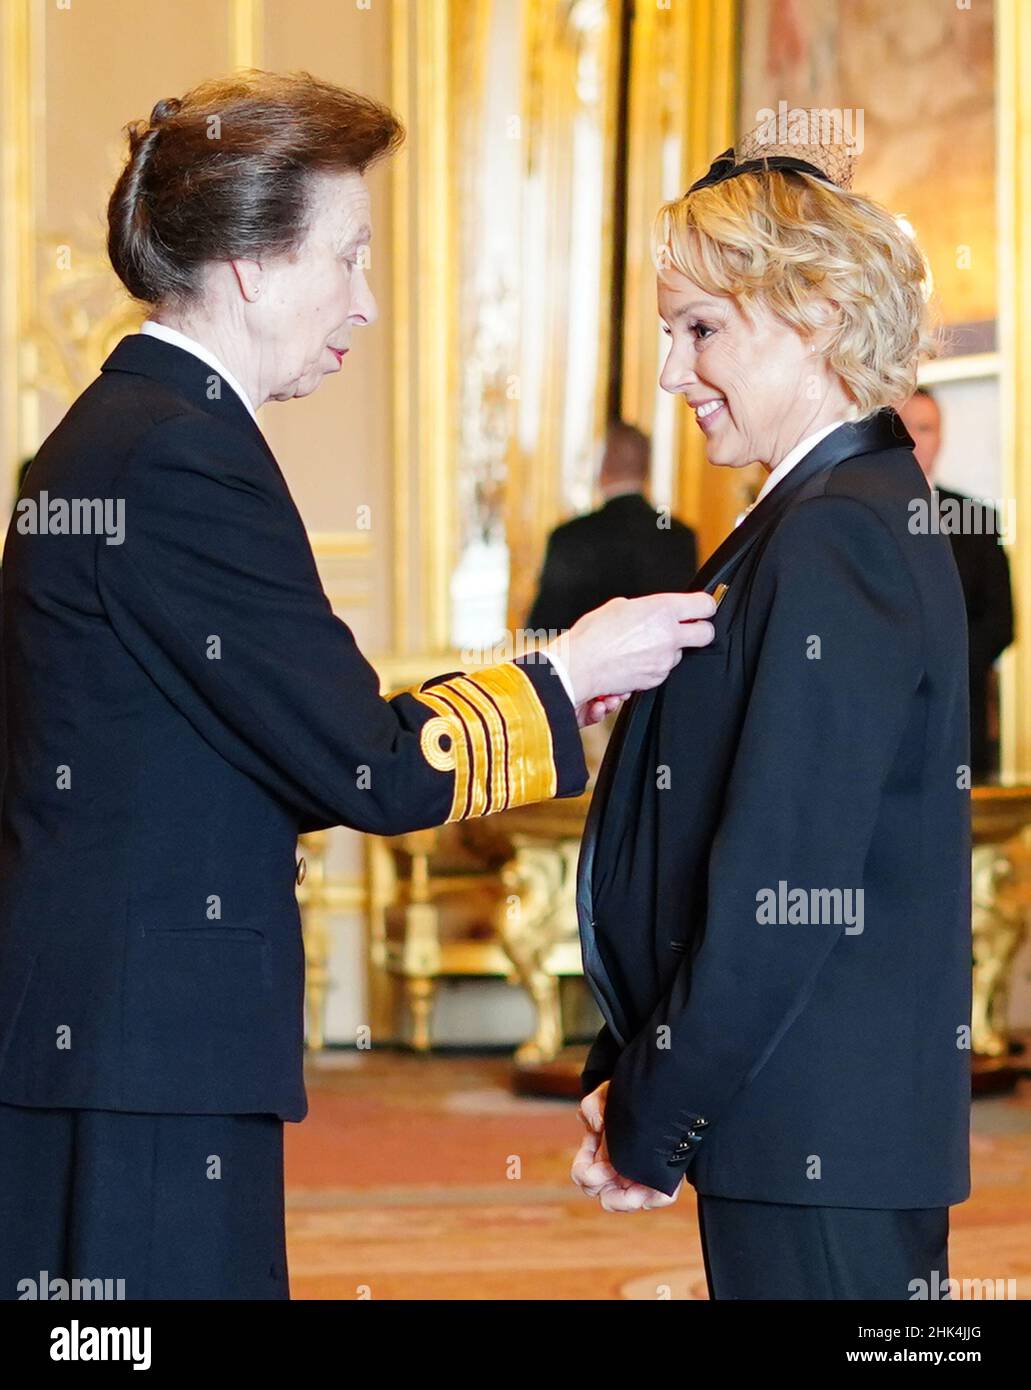 Coronation Street star Sally Dynevor, from Altrincham, is made an MBE (Member of the Order of the British Empire) by the Princess Royal at Windsor Castle. Picture date: Wednesday February 2, 2022. Stock Photo